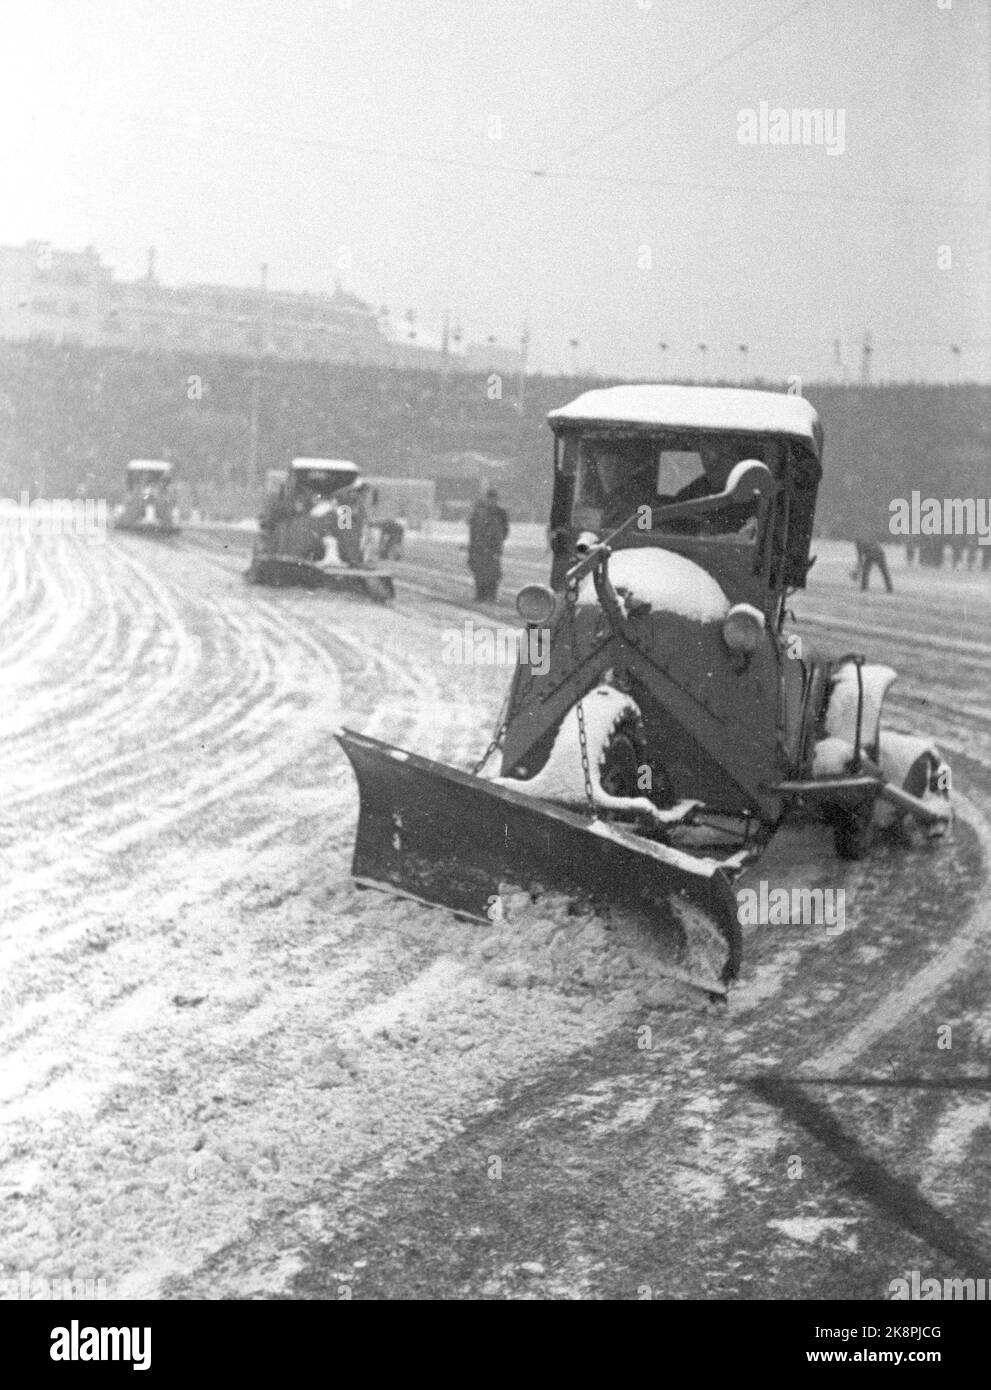 Oslo 19471115. Football in snowy weather at Bislett. The football match between Dynamo and Skeid was played on winter. Before and during the match it snowed tightly, and the grass mat was white and hard. 32,000 spectators are a record at Bislett. All morning, the snow plow was underway to clear the space. Photo: Current / NTB Stock Photo